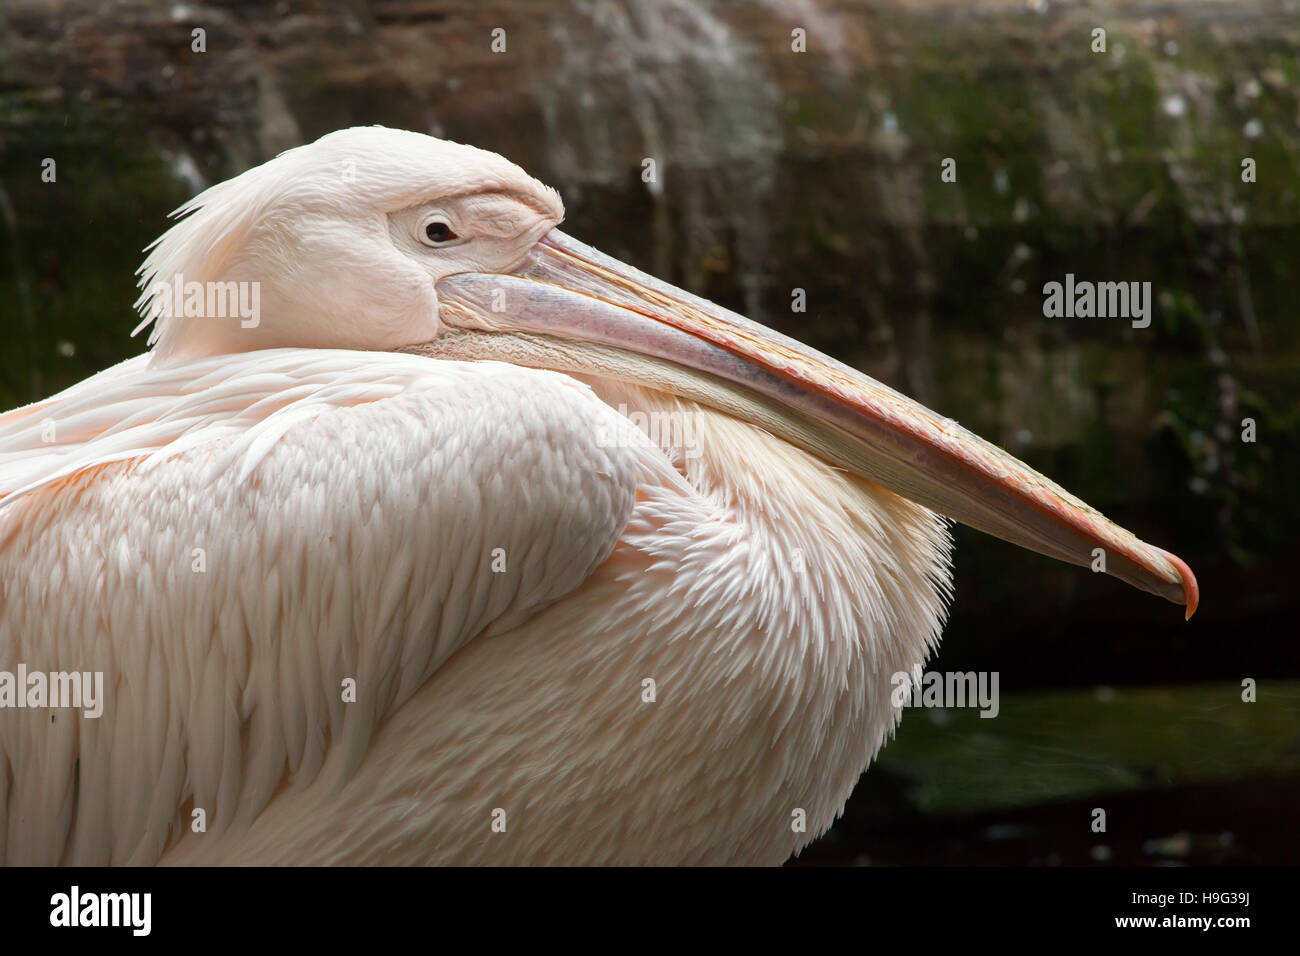 Great white pelican (Pelecanus onocrotalus), also known as the rosy pelican. Stock Photo